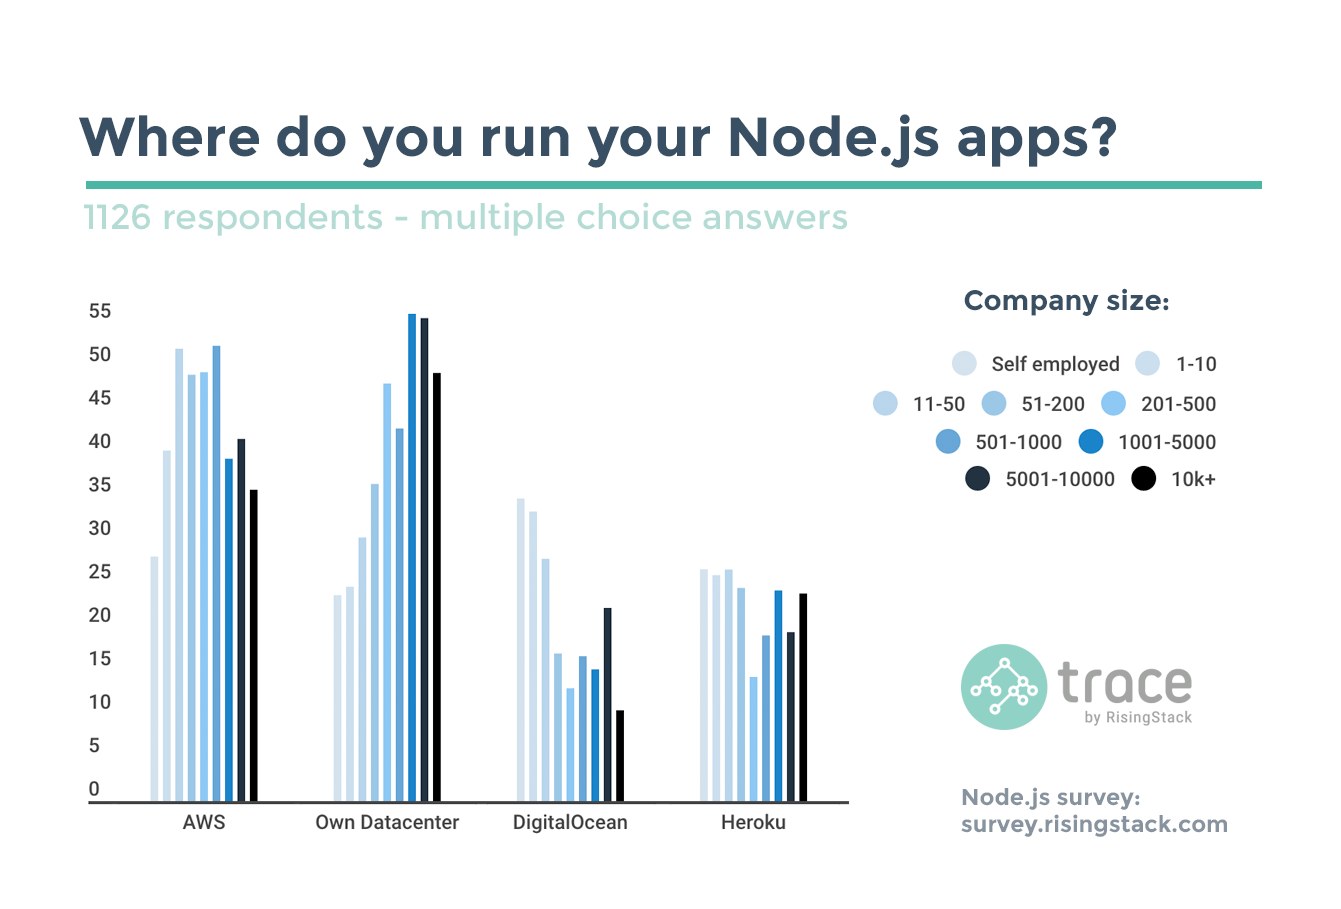 Node.js Survey - Running apps and company size